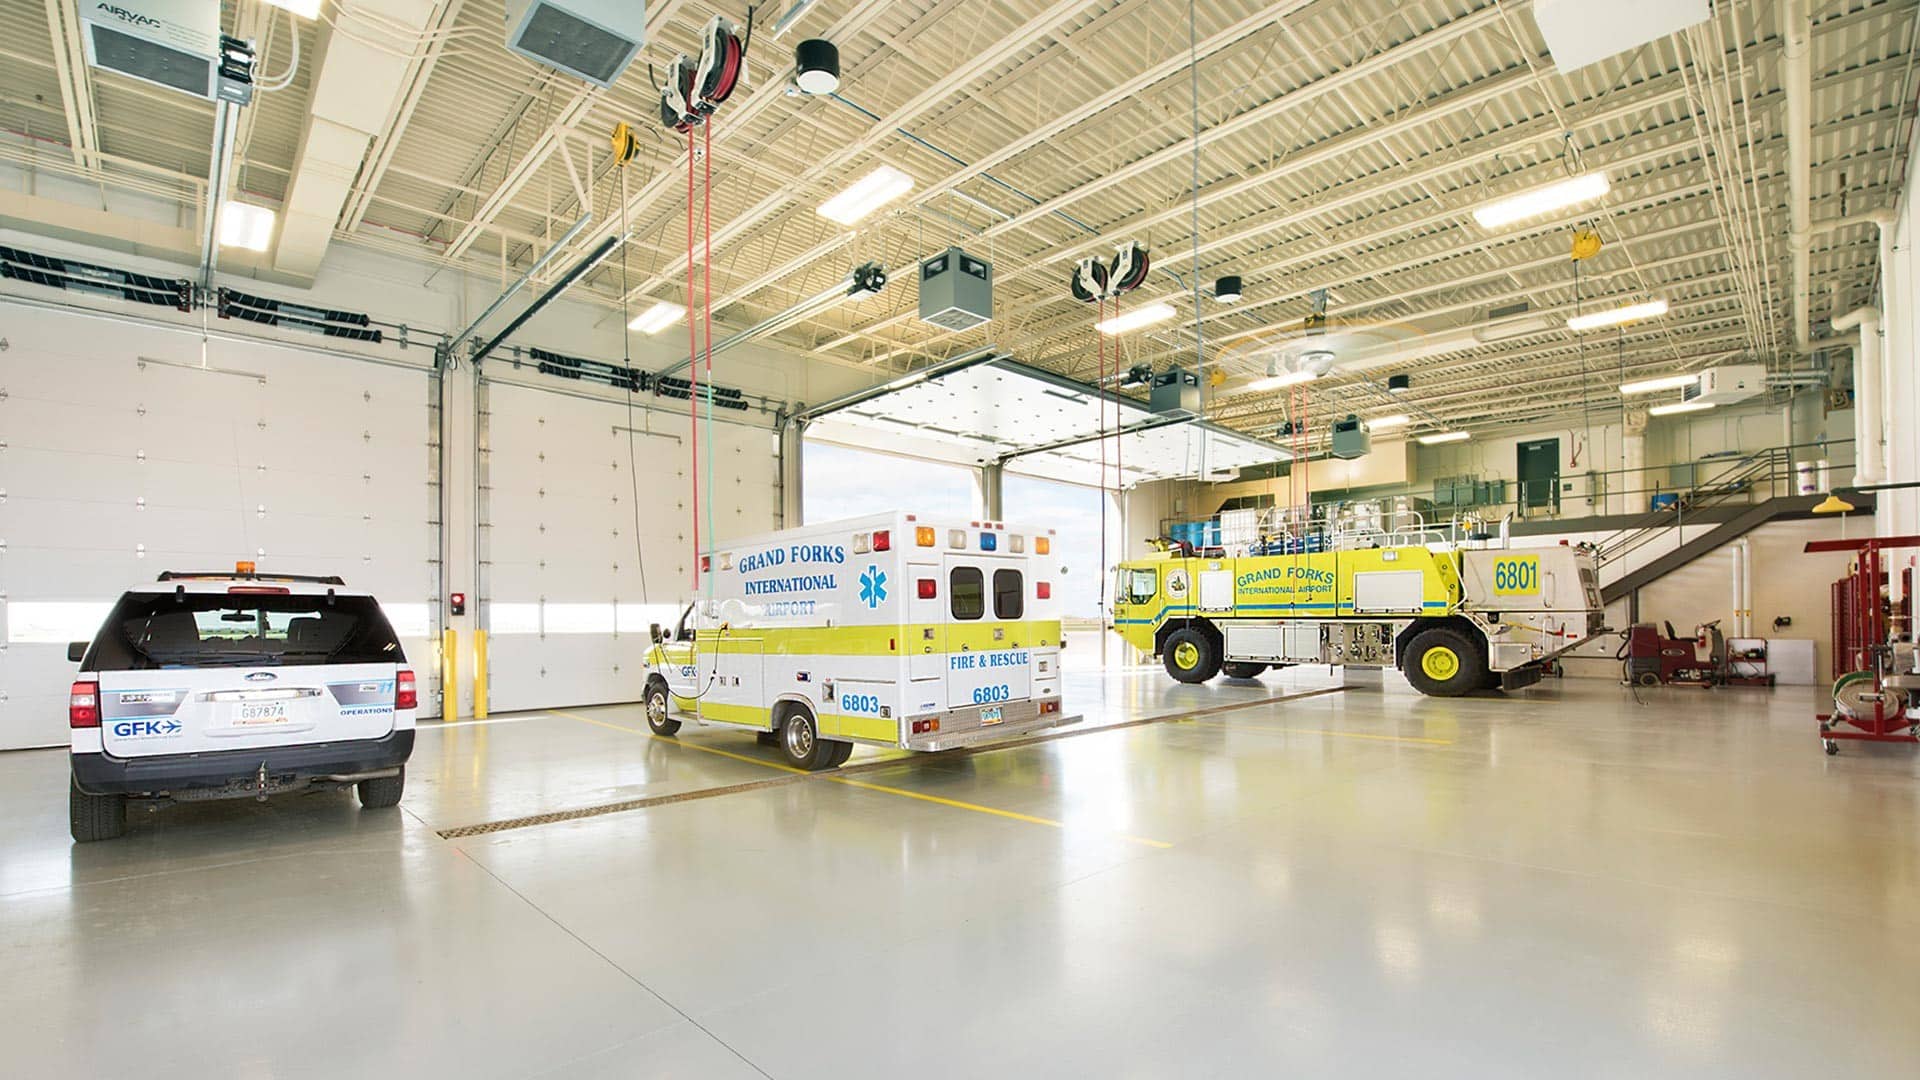 Grand Forks International Airport Aircraft Rescue & Firefighting Station